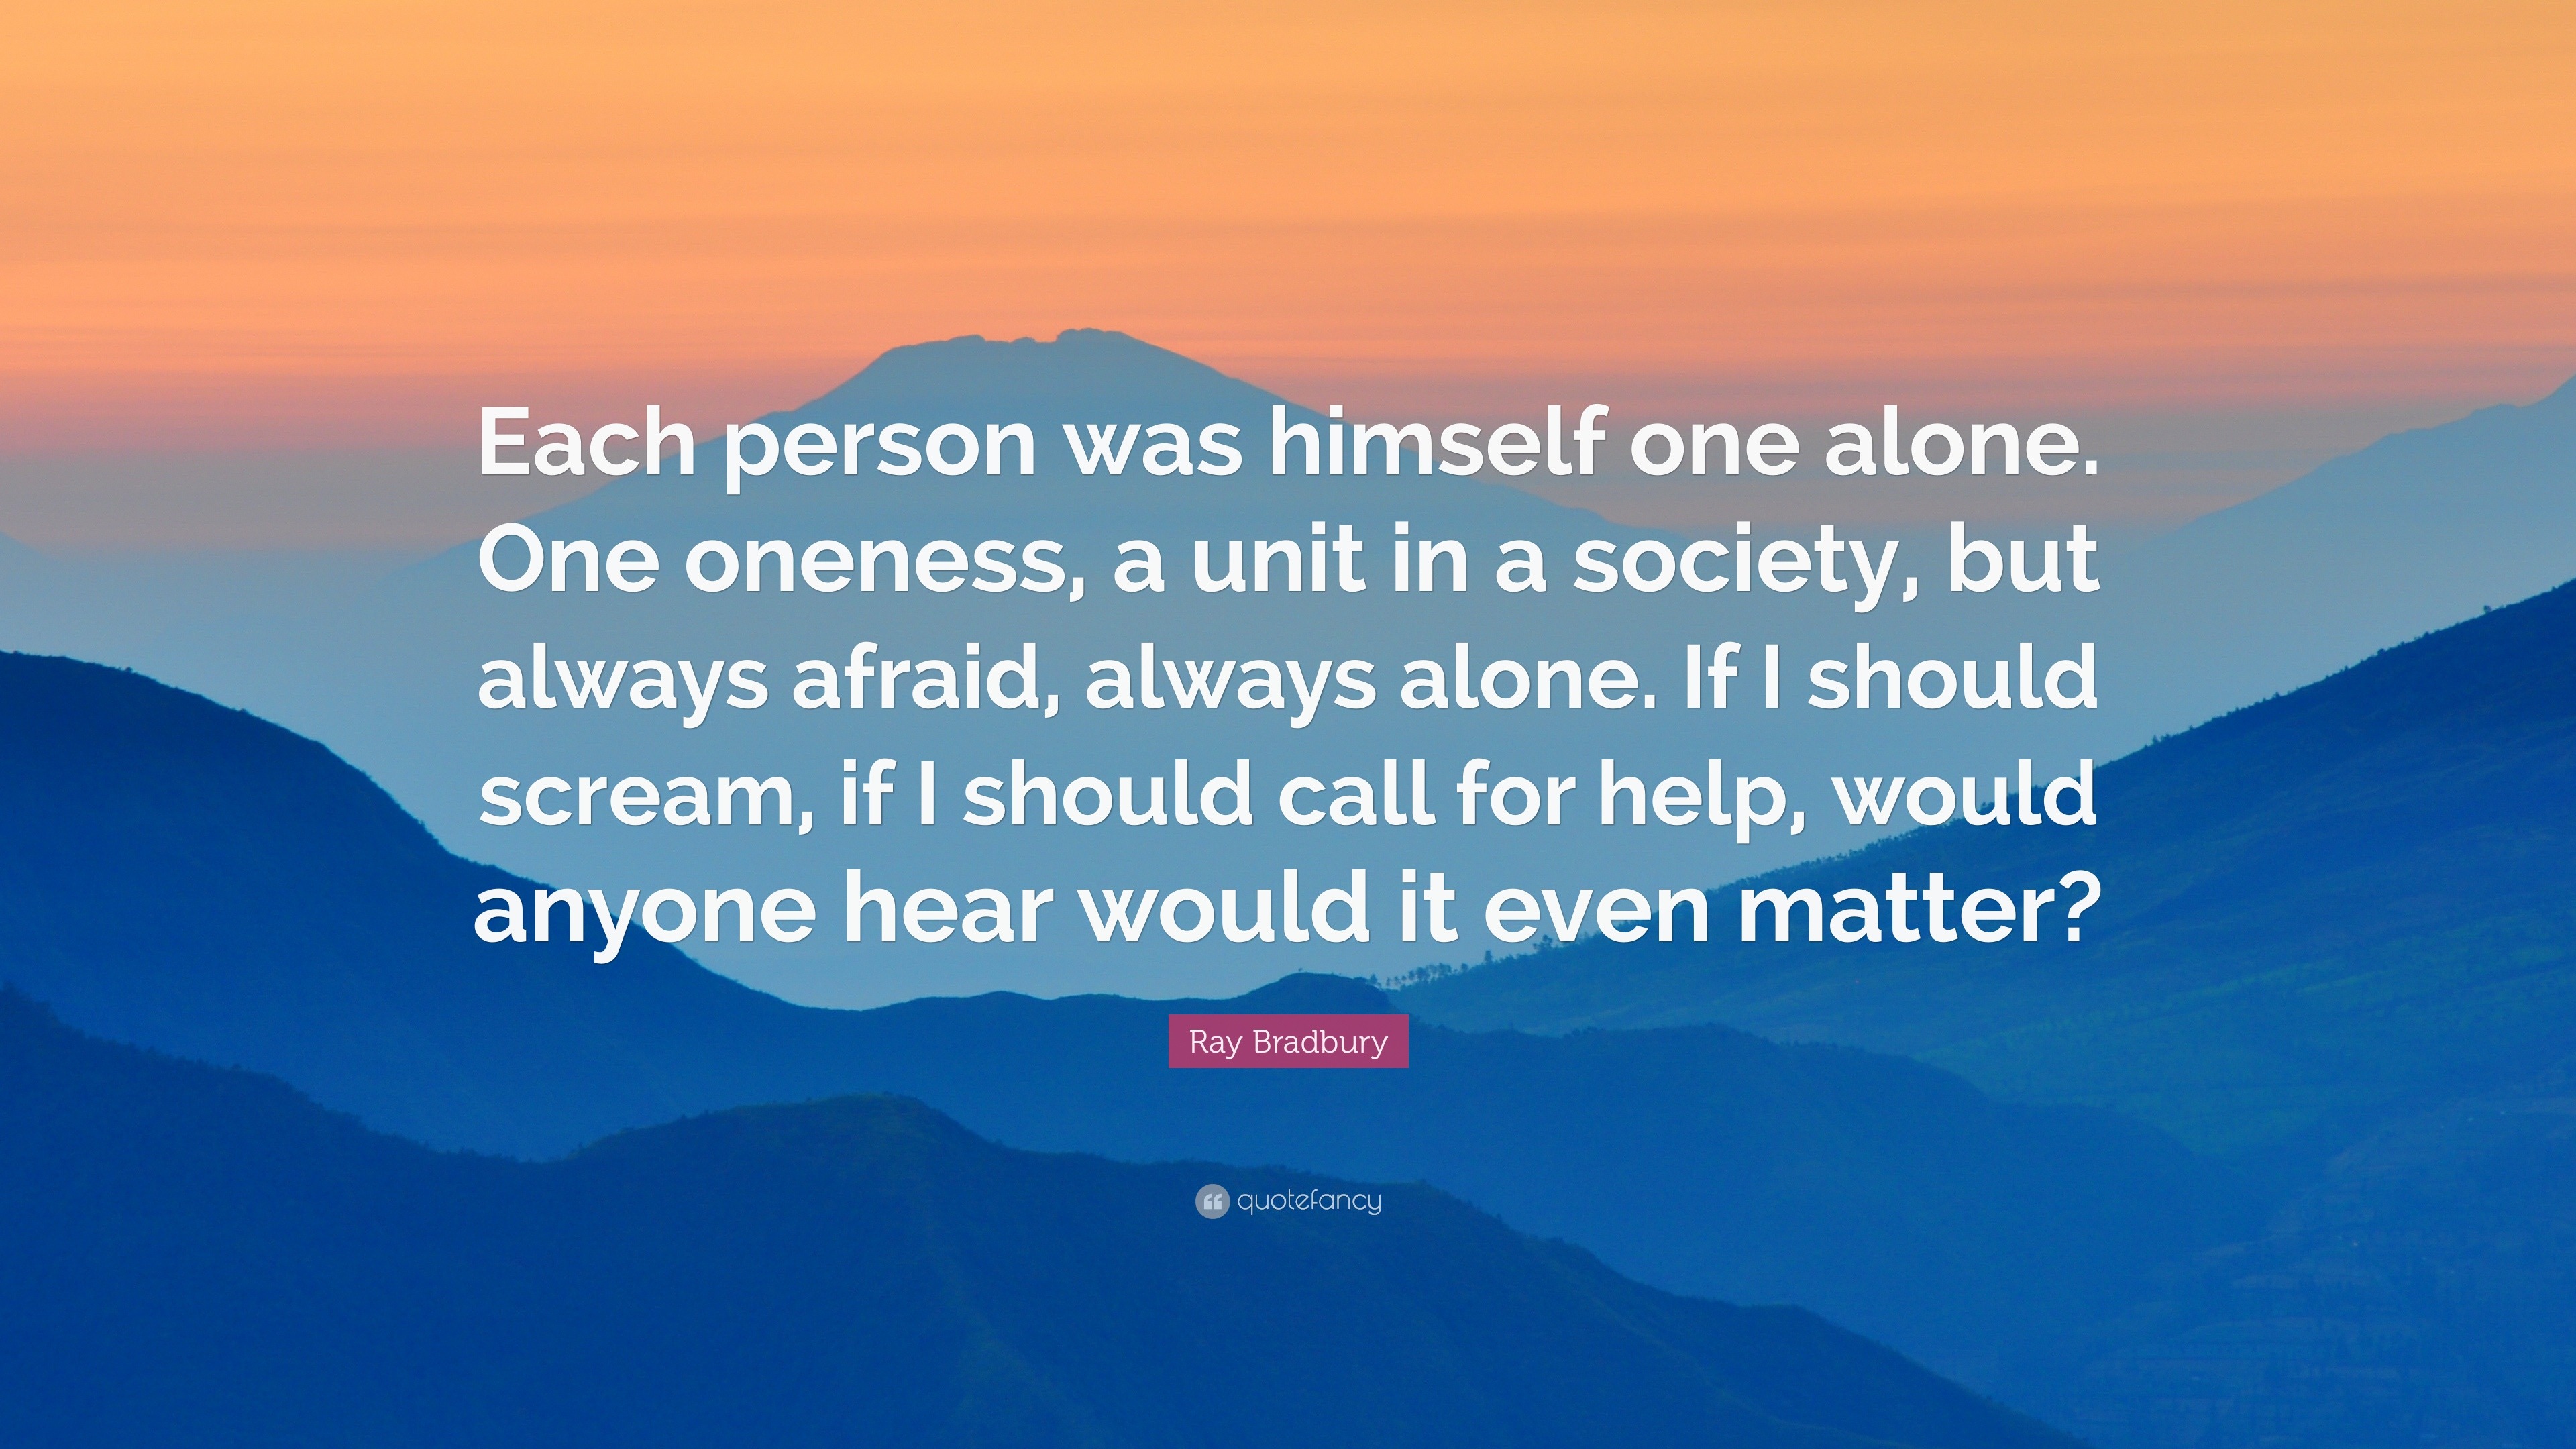 Ray Bradbury Quote: "Each person was himself one alone ...